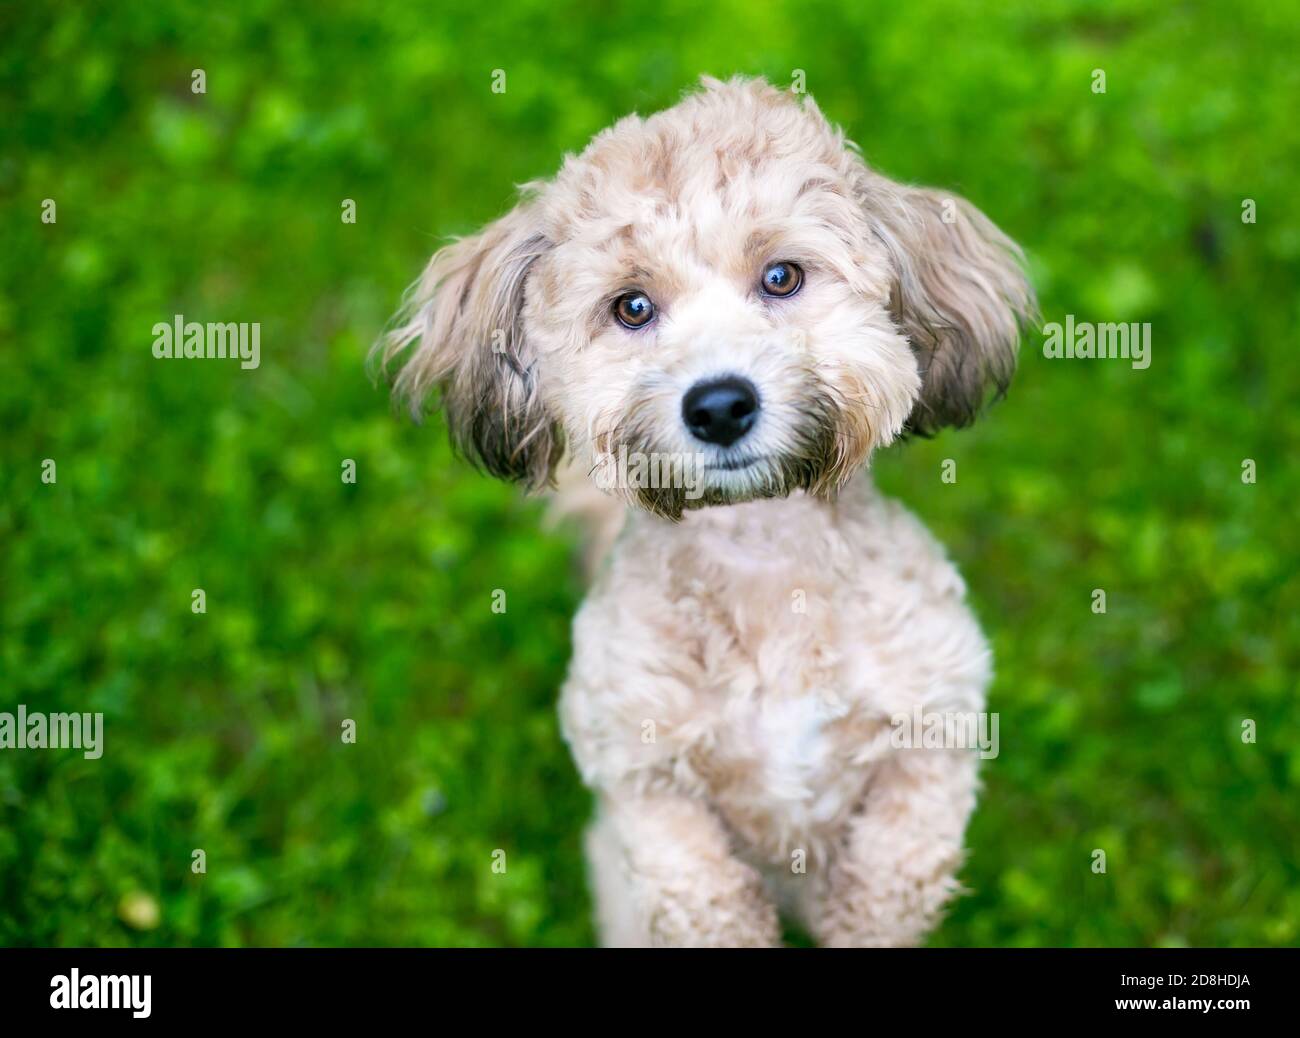 A small Poodle mixed breed dog sitting up in a begging position outdoors Stock Photo